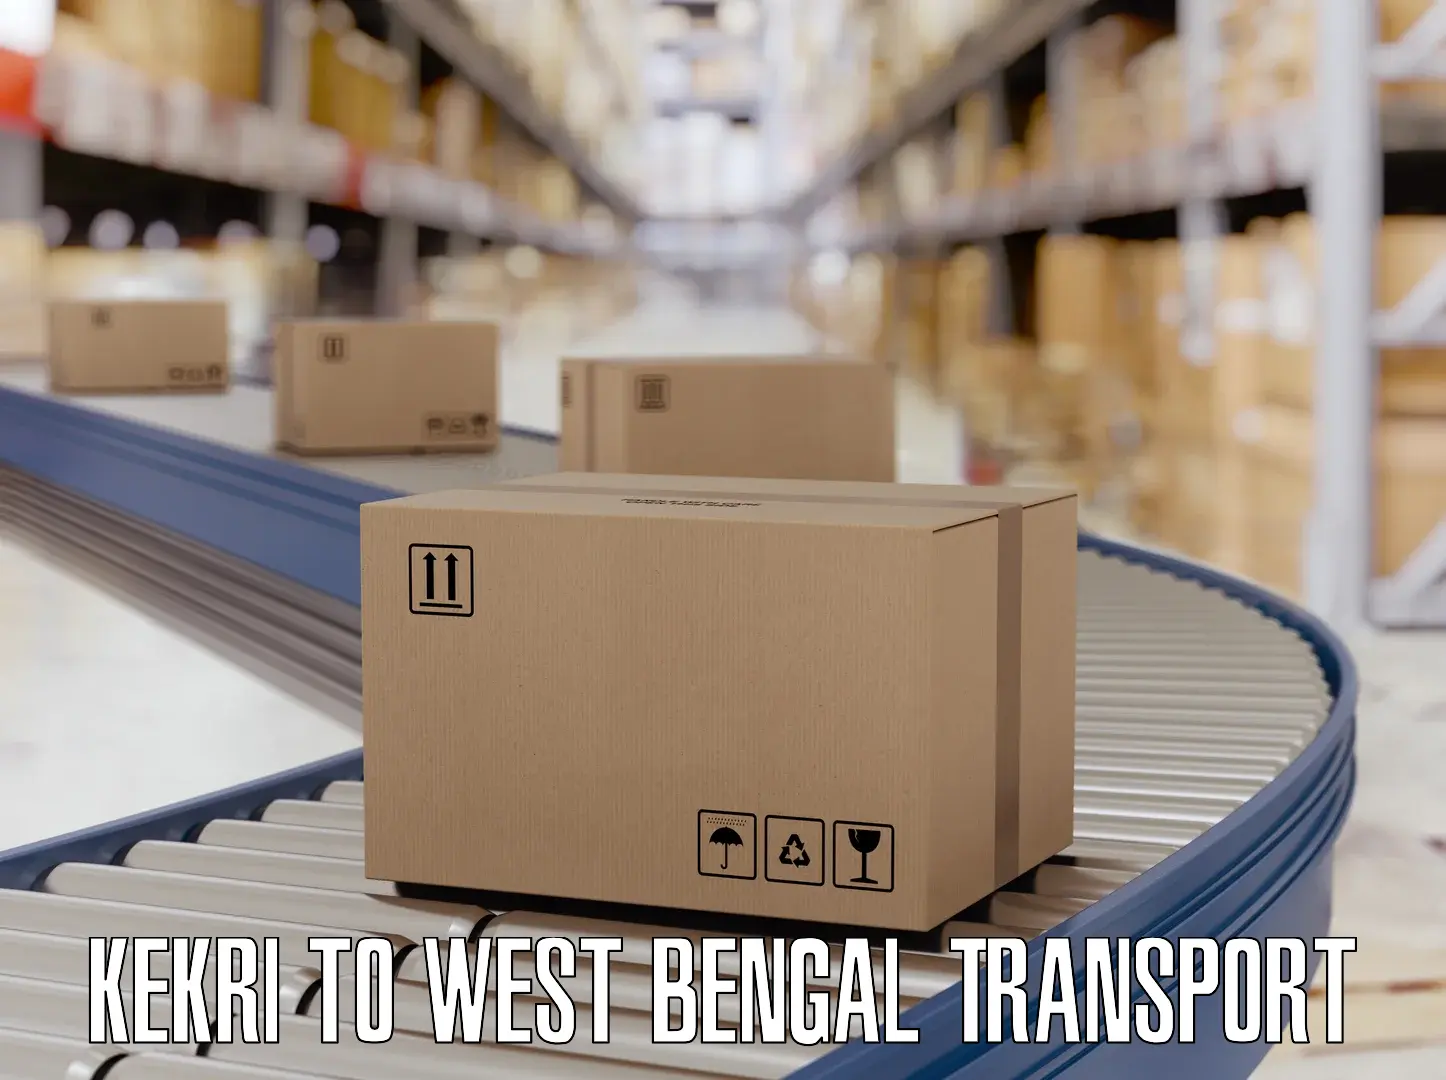 Container transport service Kekri to West Bengal